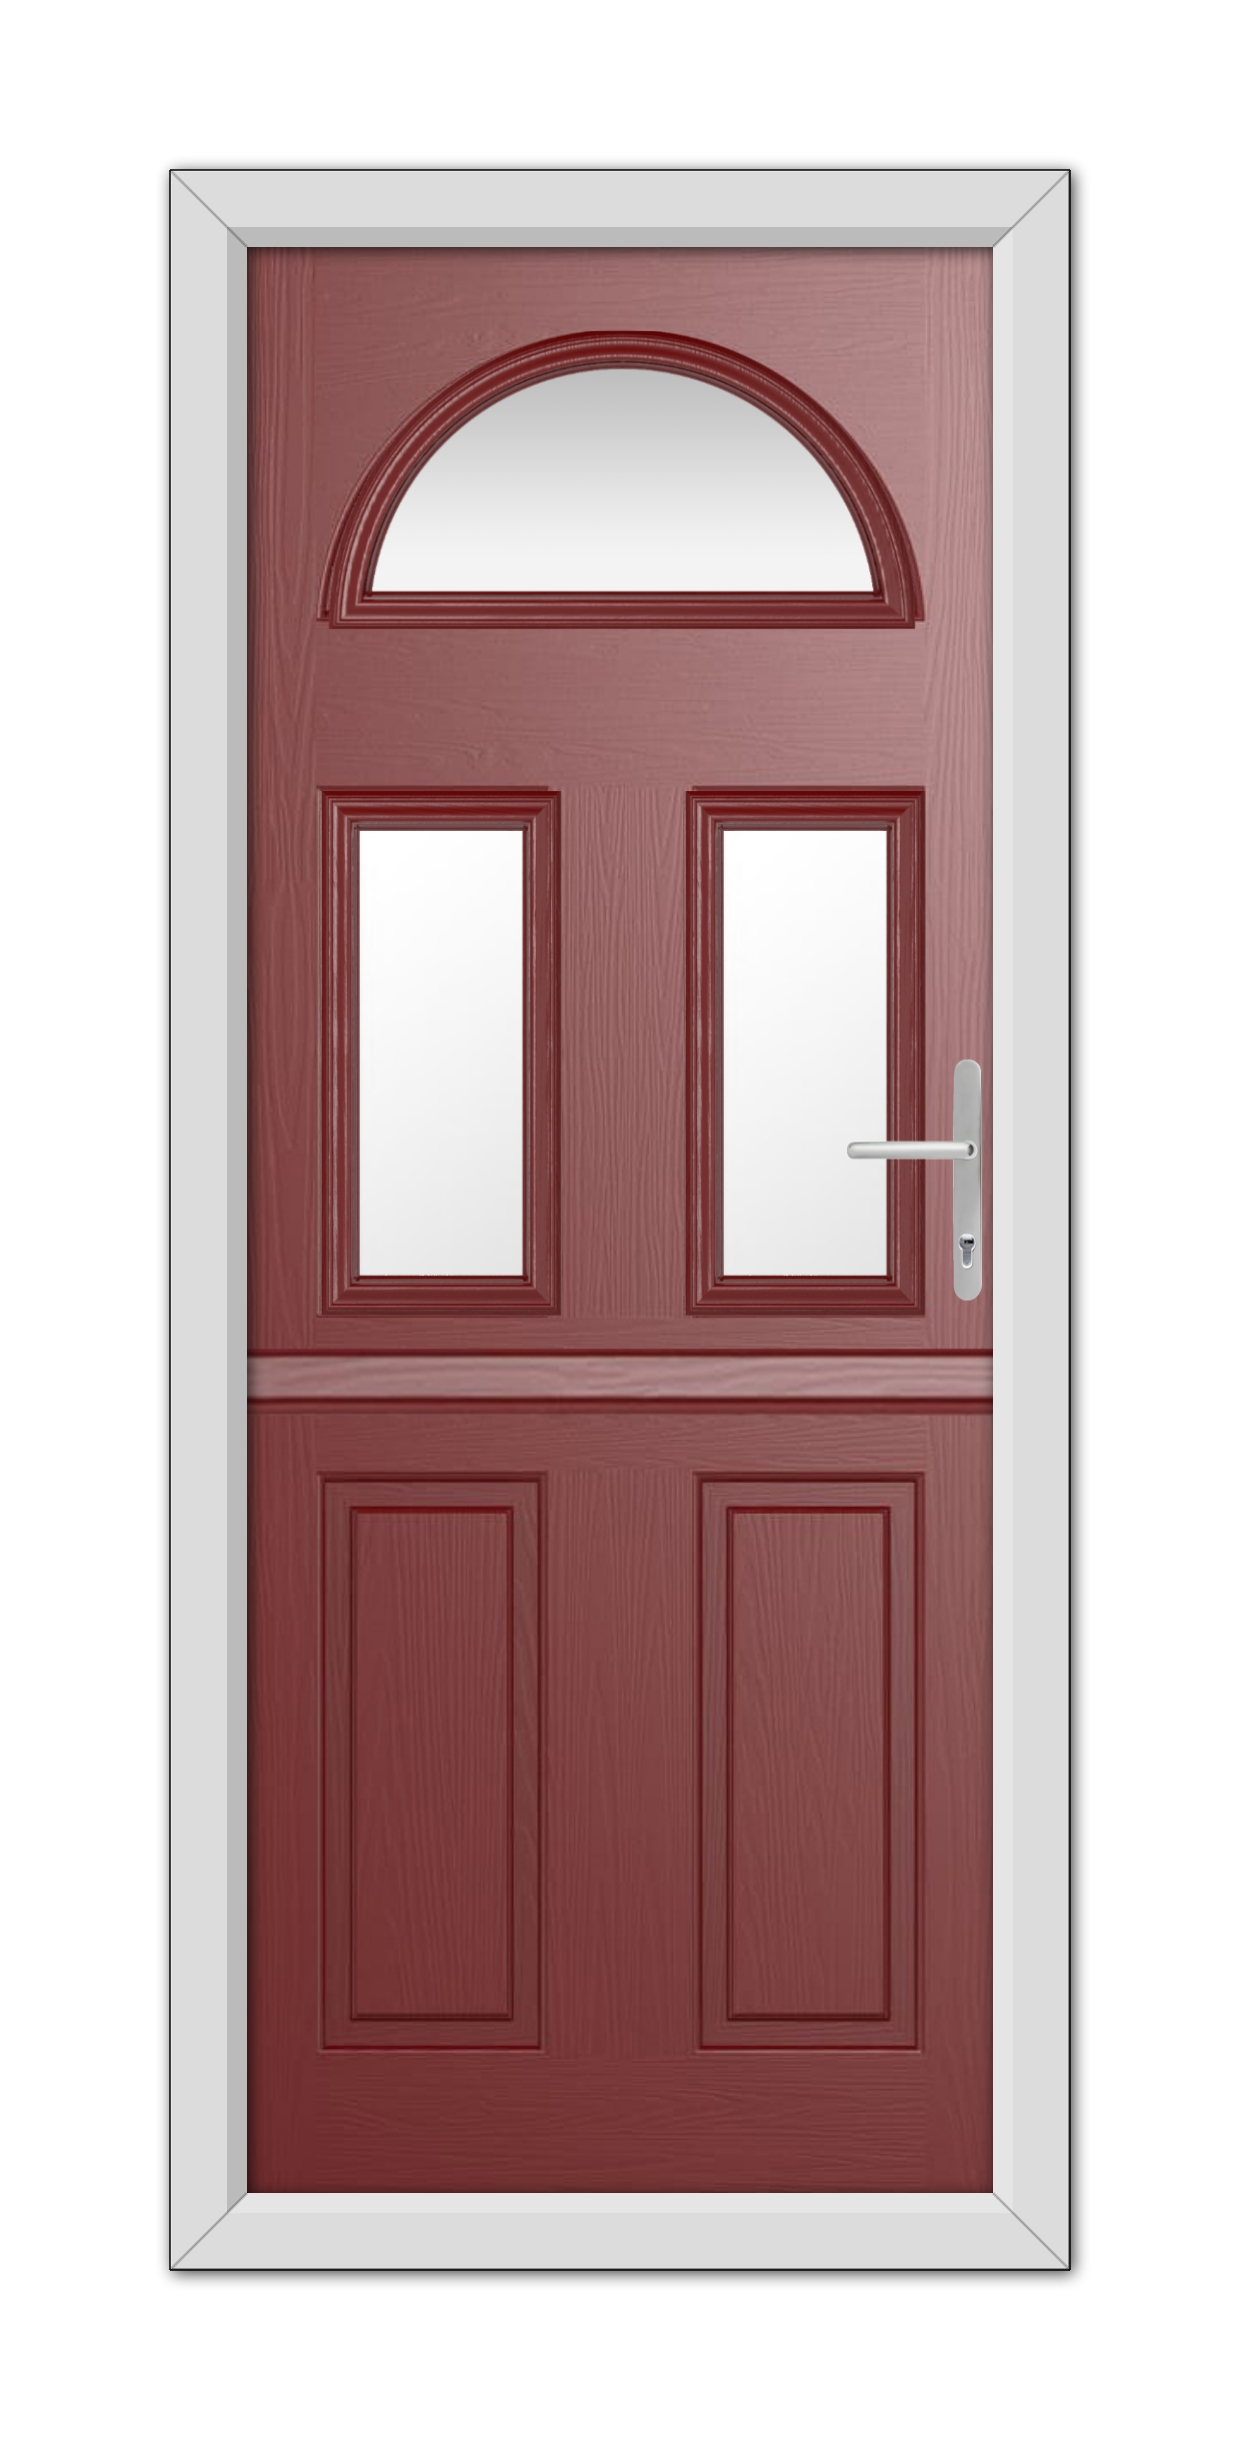 A modern Red Winslow 3 Stable Composite Door 48mm Timber Core featuring an arched window at the top, two rectangular windows with white trim in each door panel, and a silver handle on the right side.